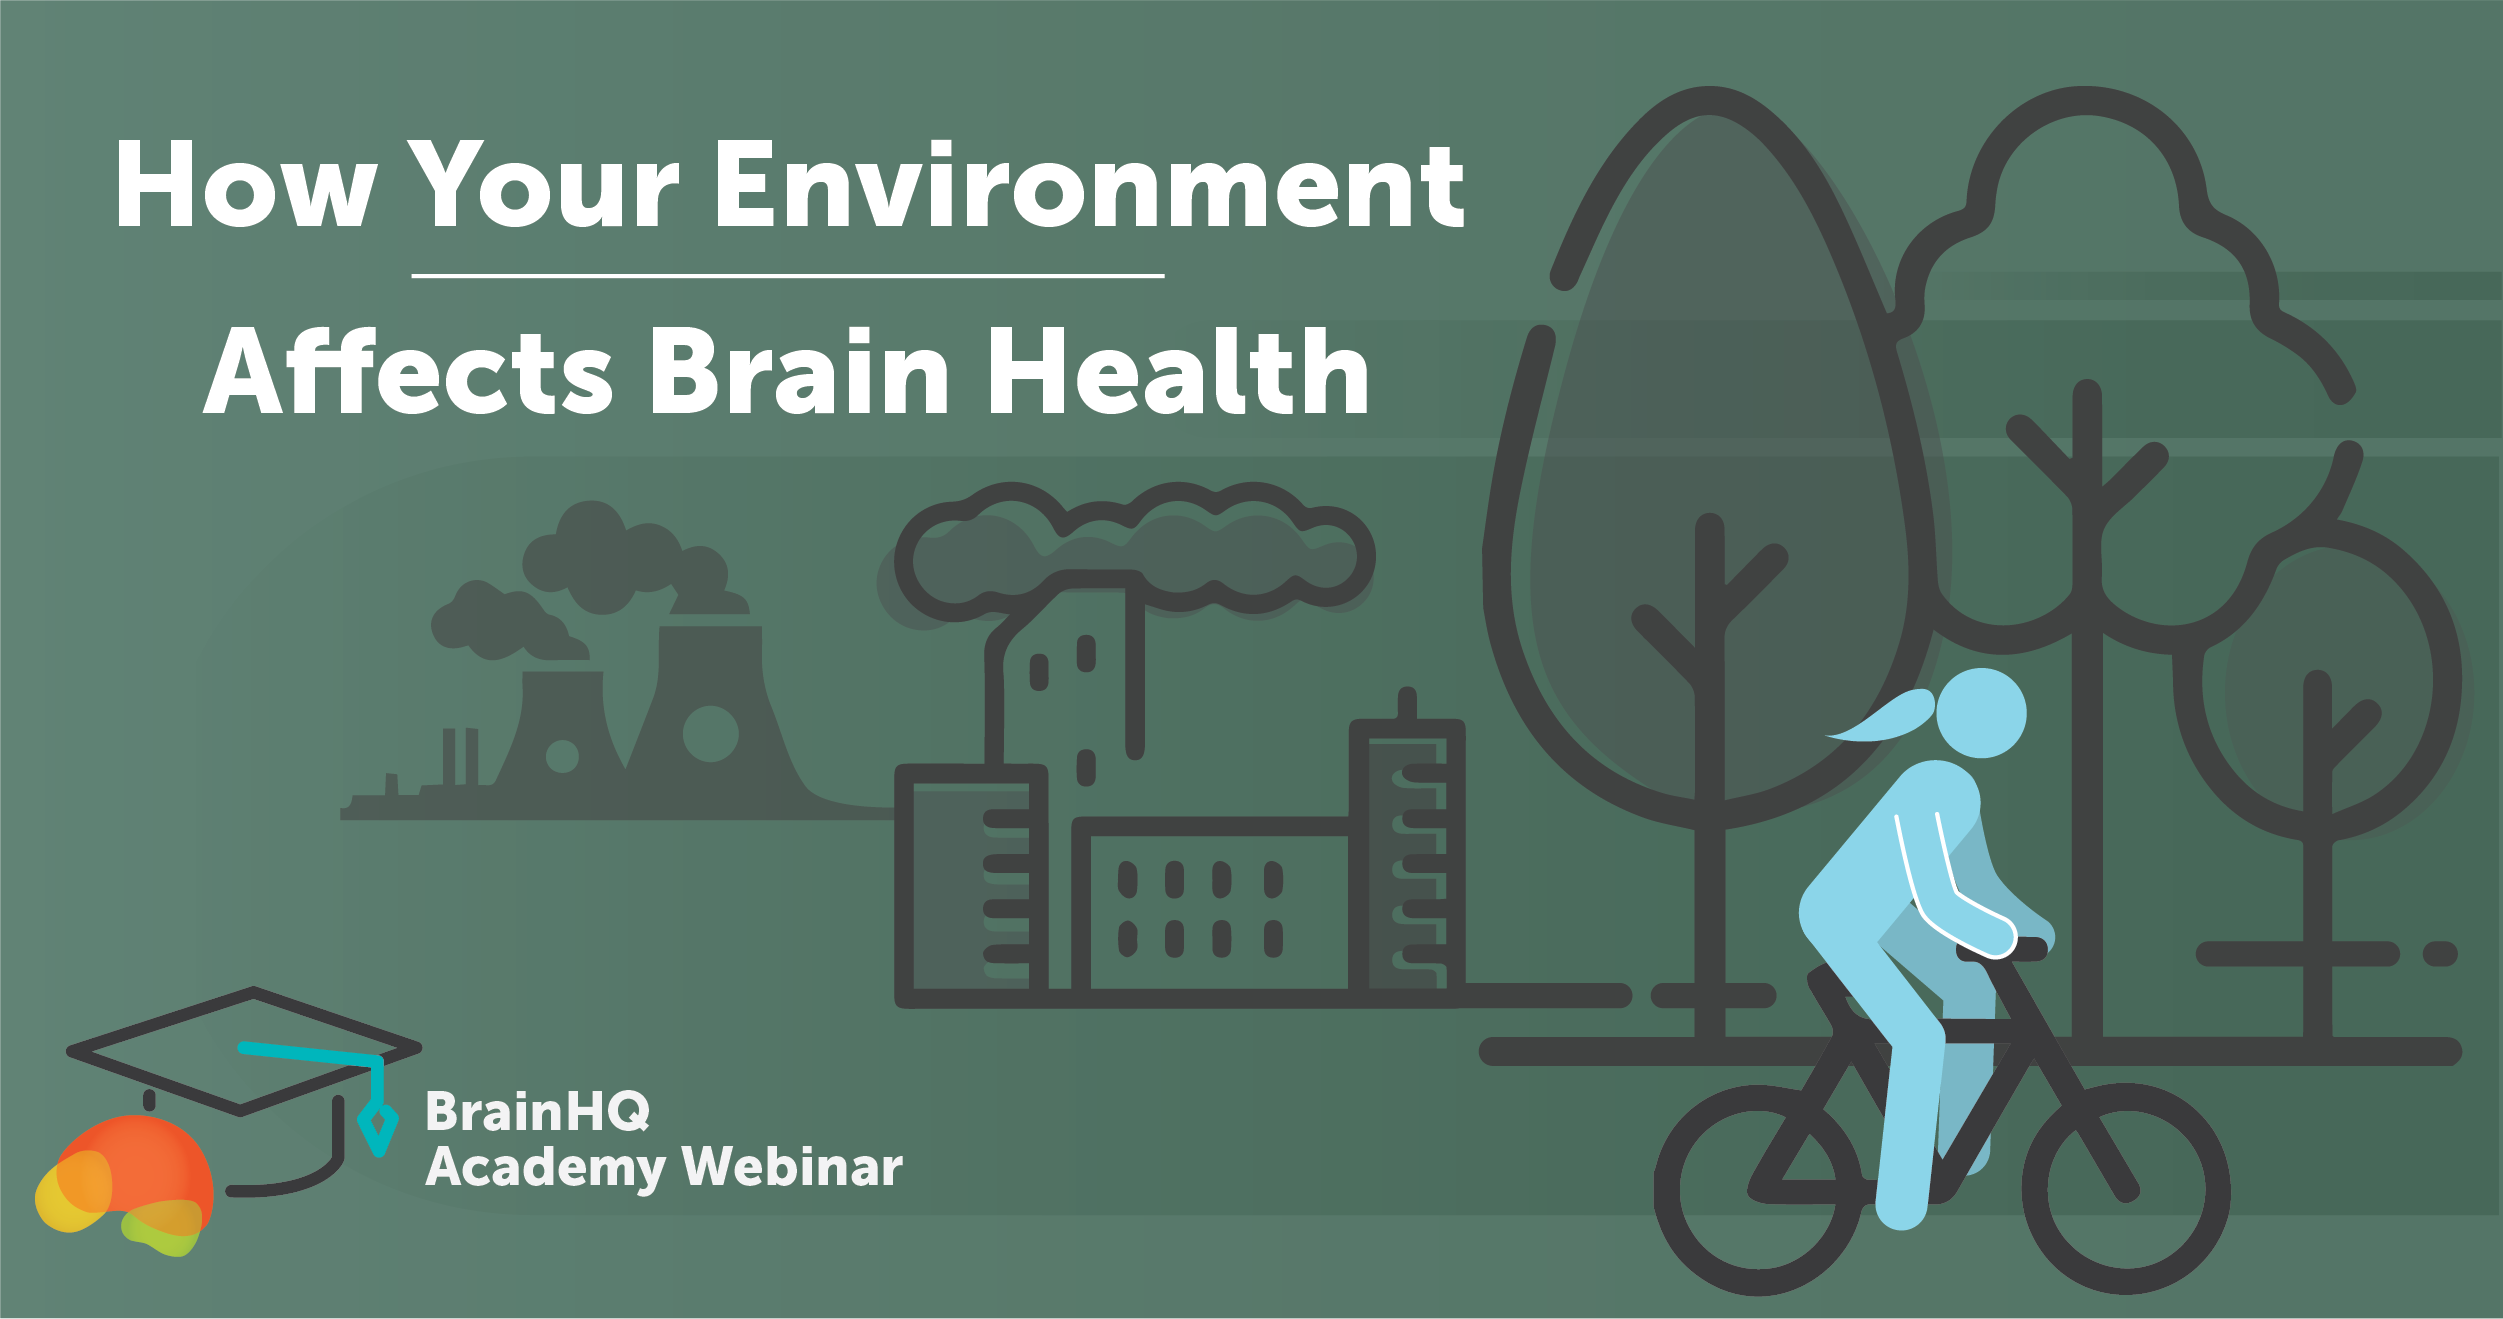 How Your Environment Affects Brain Health